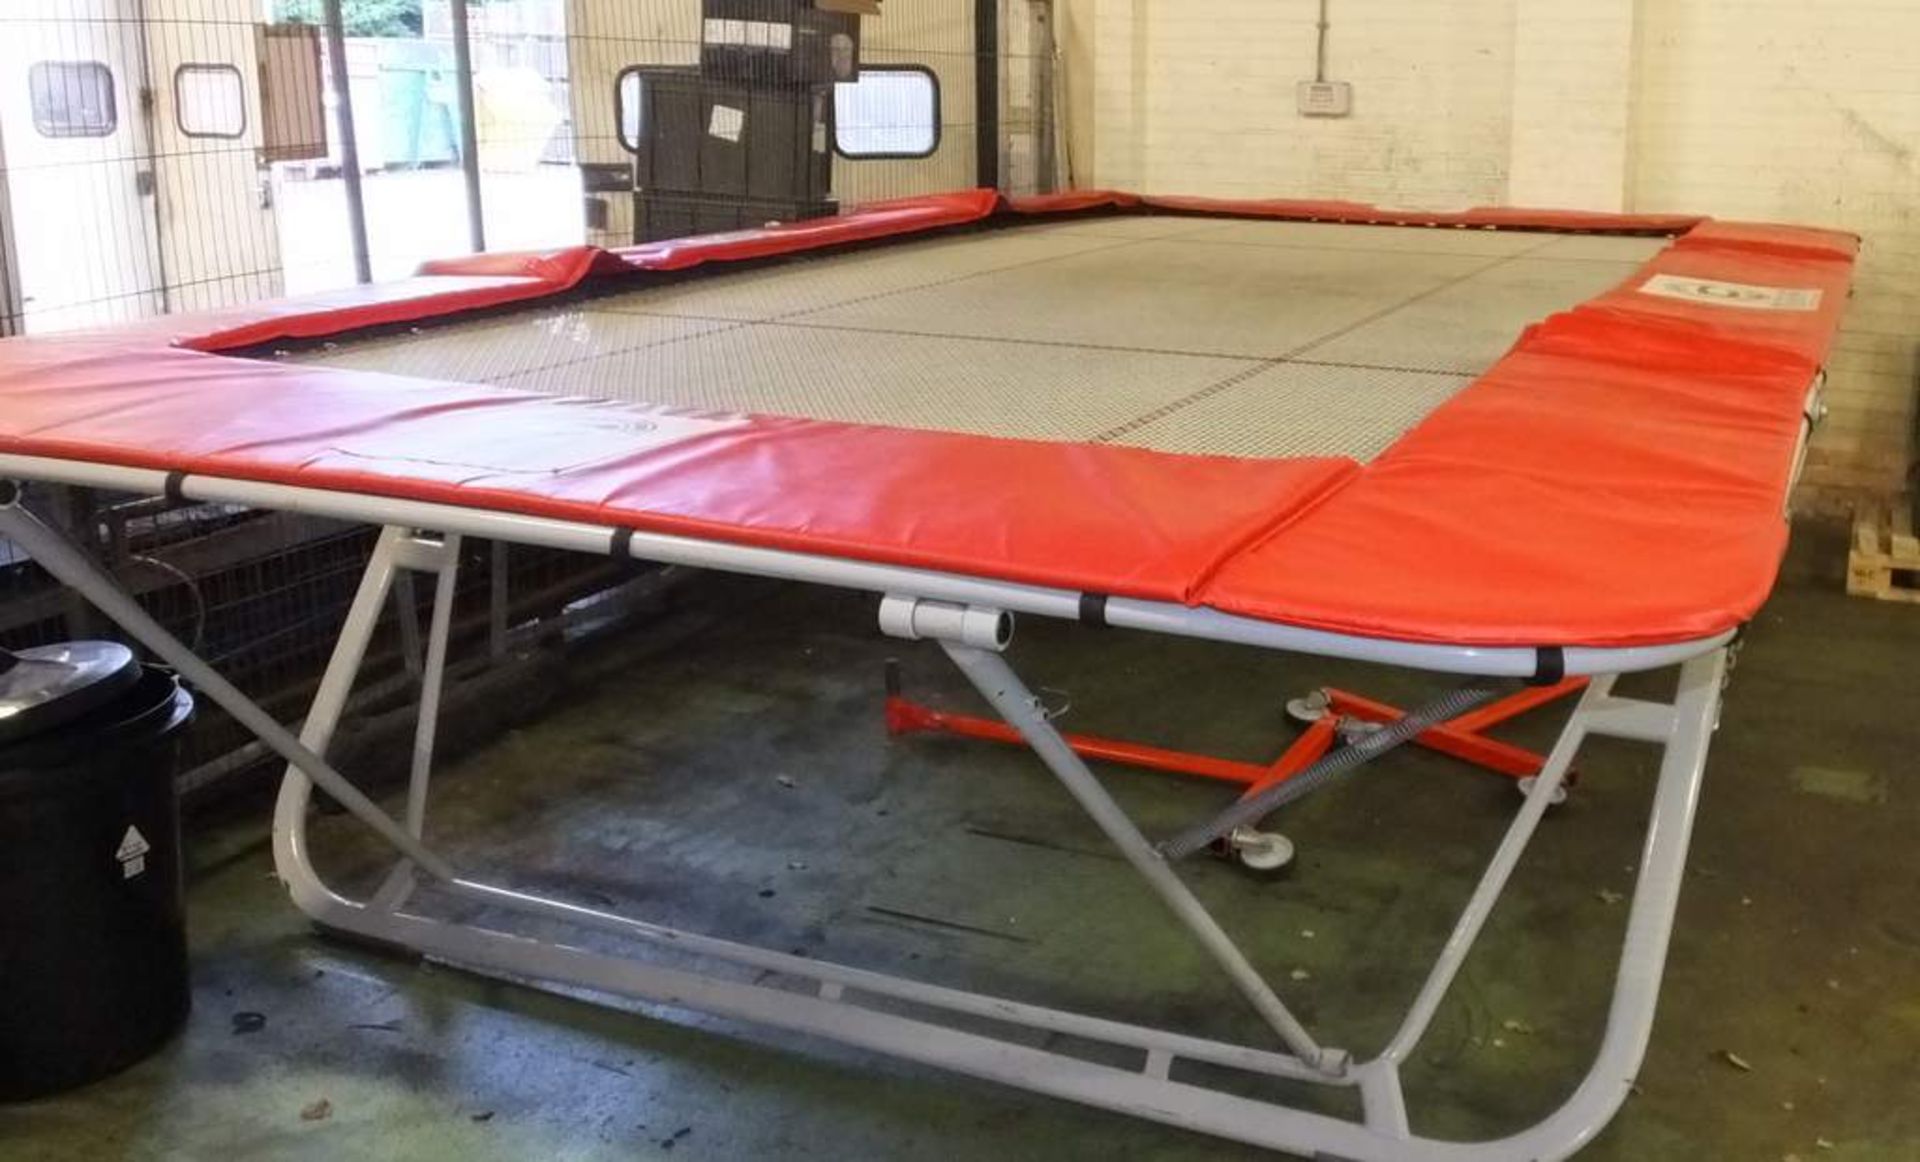 Continental gymnastics trampoline - Full dimensions: 5.3x3.1x1.2m & Bed size: 4.1x2.1m (LxWxH) - Image 4 of 5